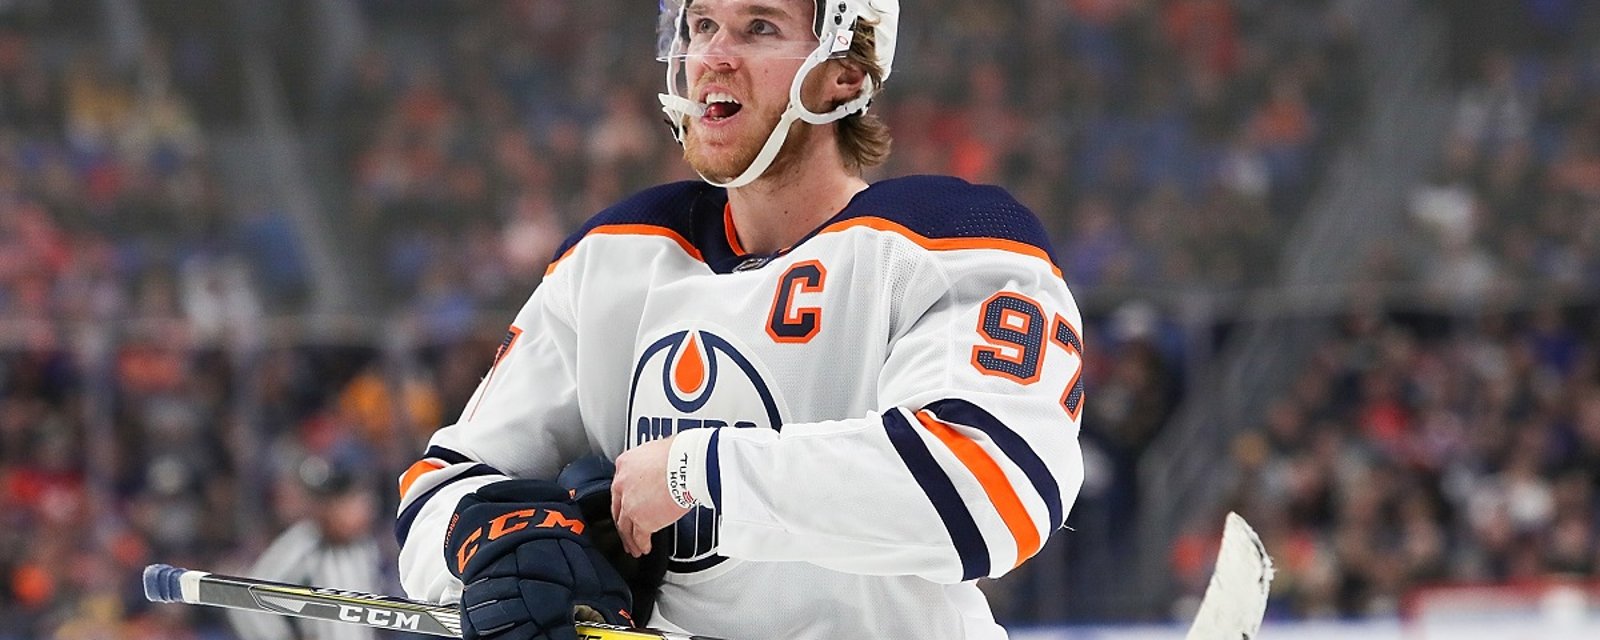 Connor McDavid scores the goal of the year!